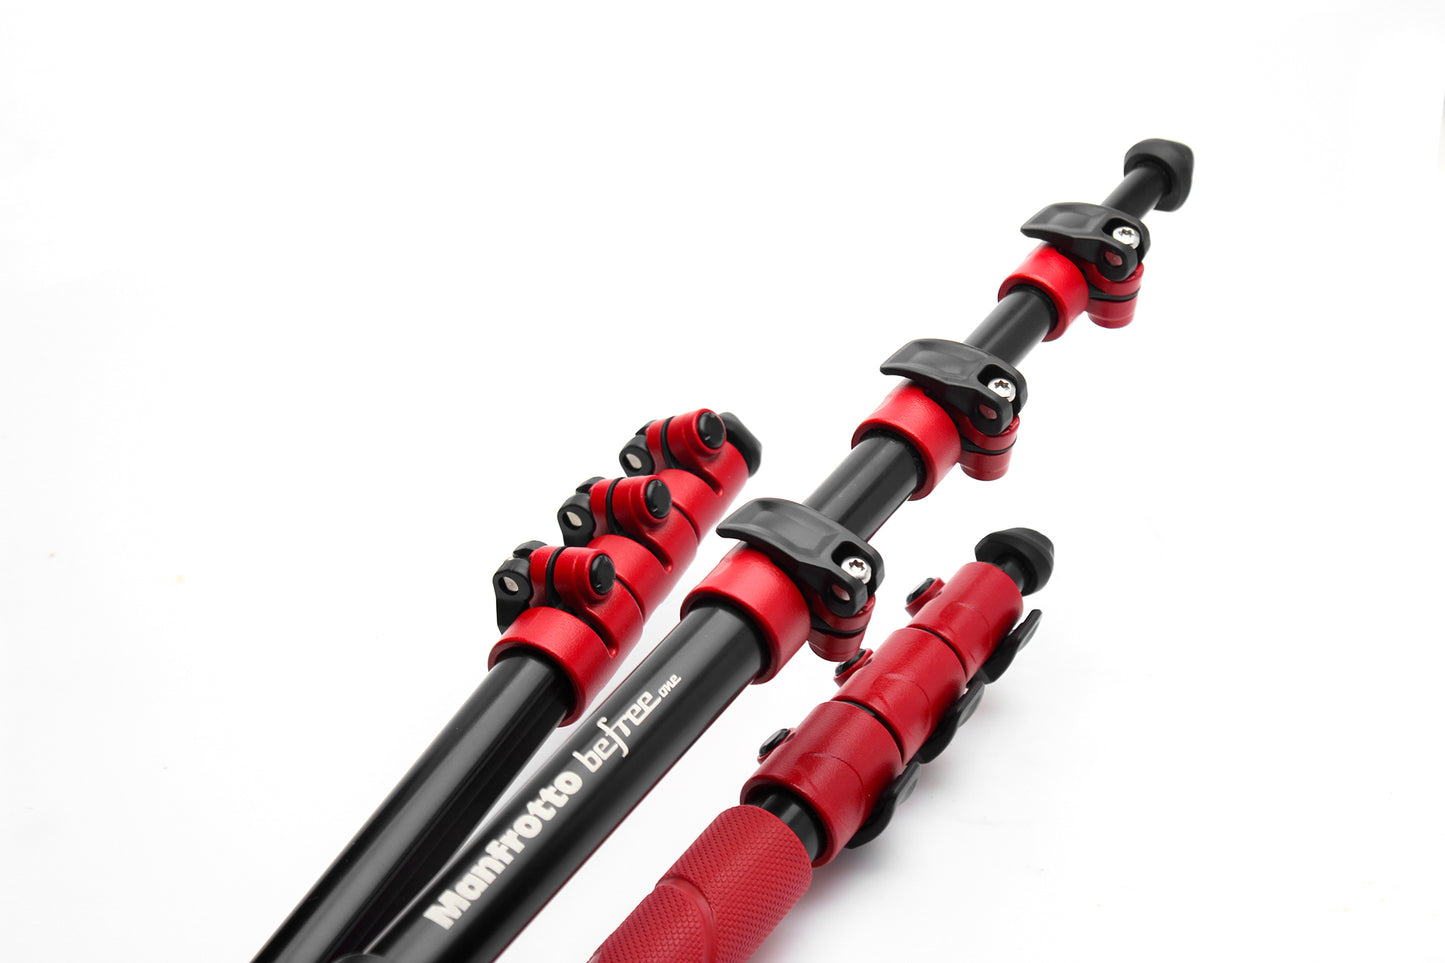 Used Manfrotto BeFree One Travel Tripod with Head